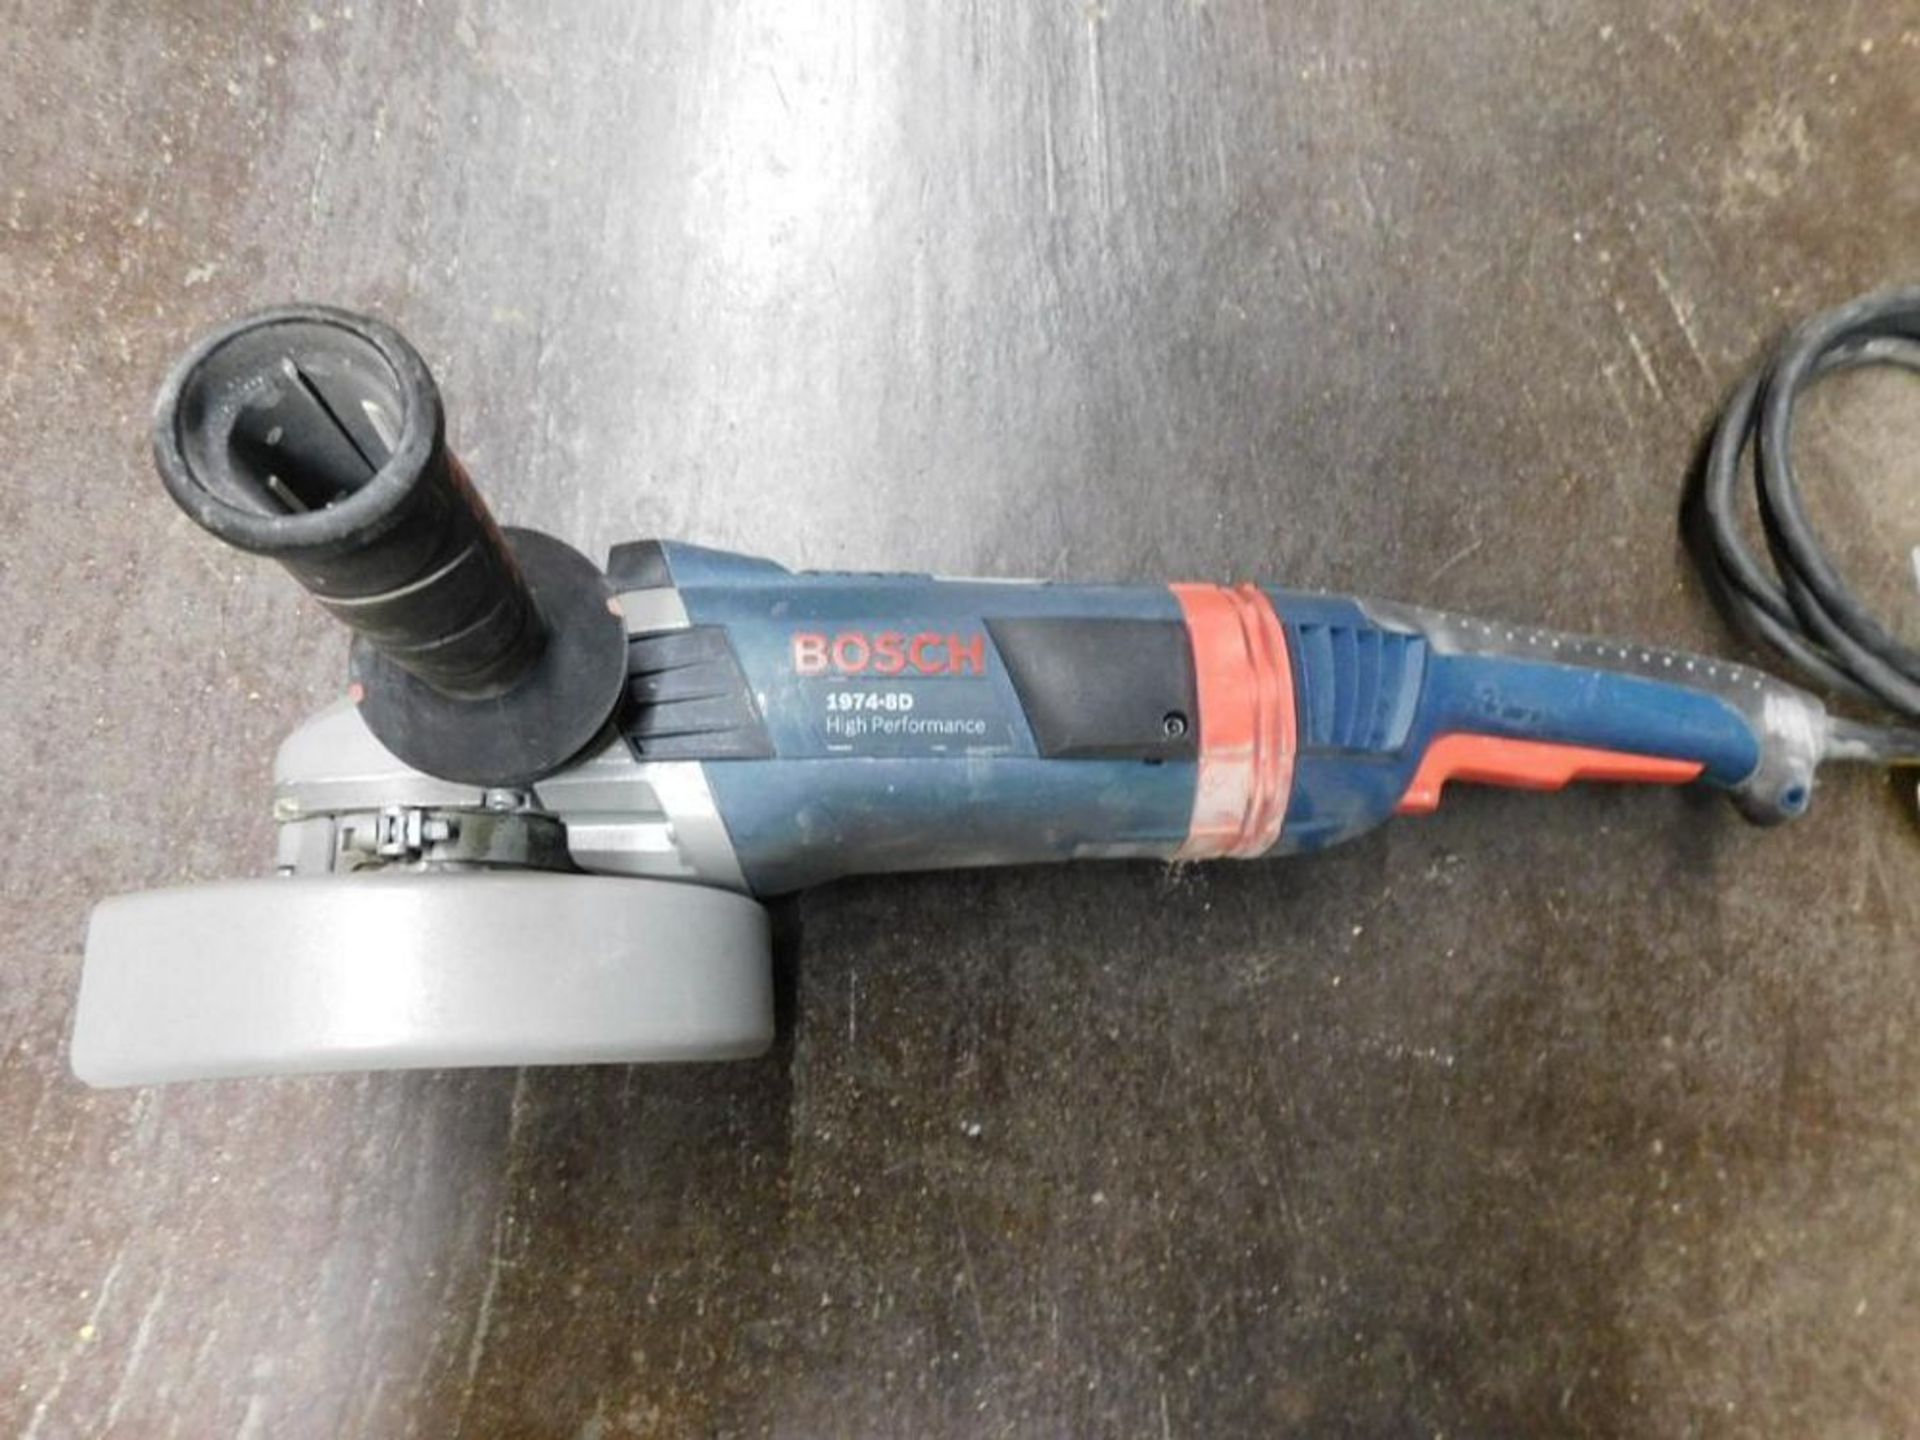 Bosch 1974-8D High Performance 7" Angle Grinder (LOCATION: 318 N. Milwaukee Ave., Wheeling, IL - Image 2 of 3